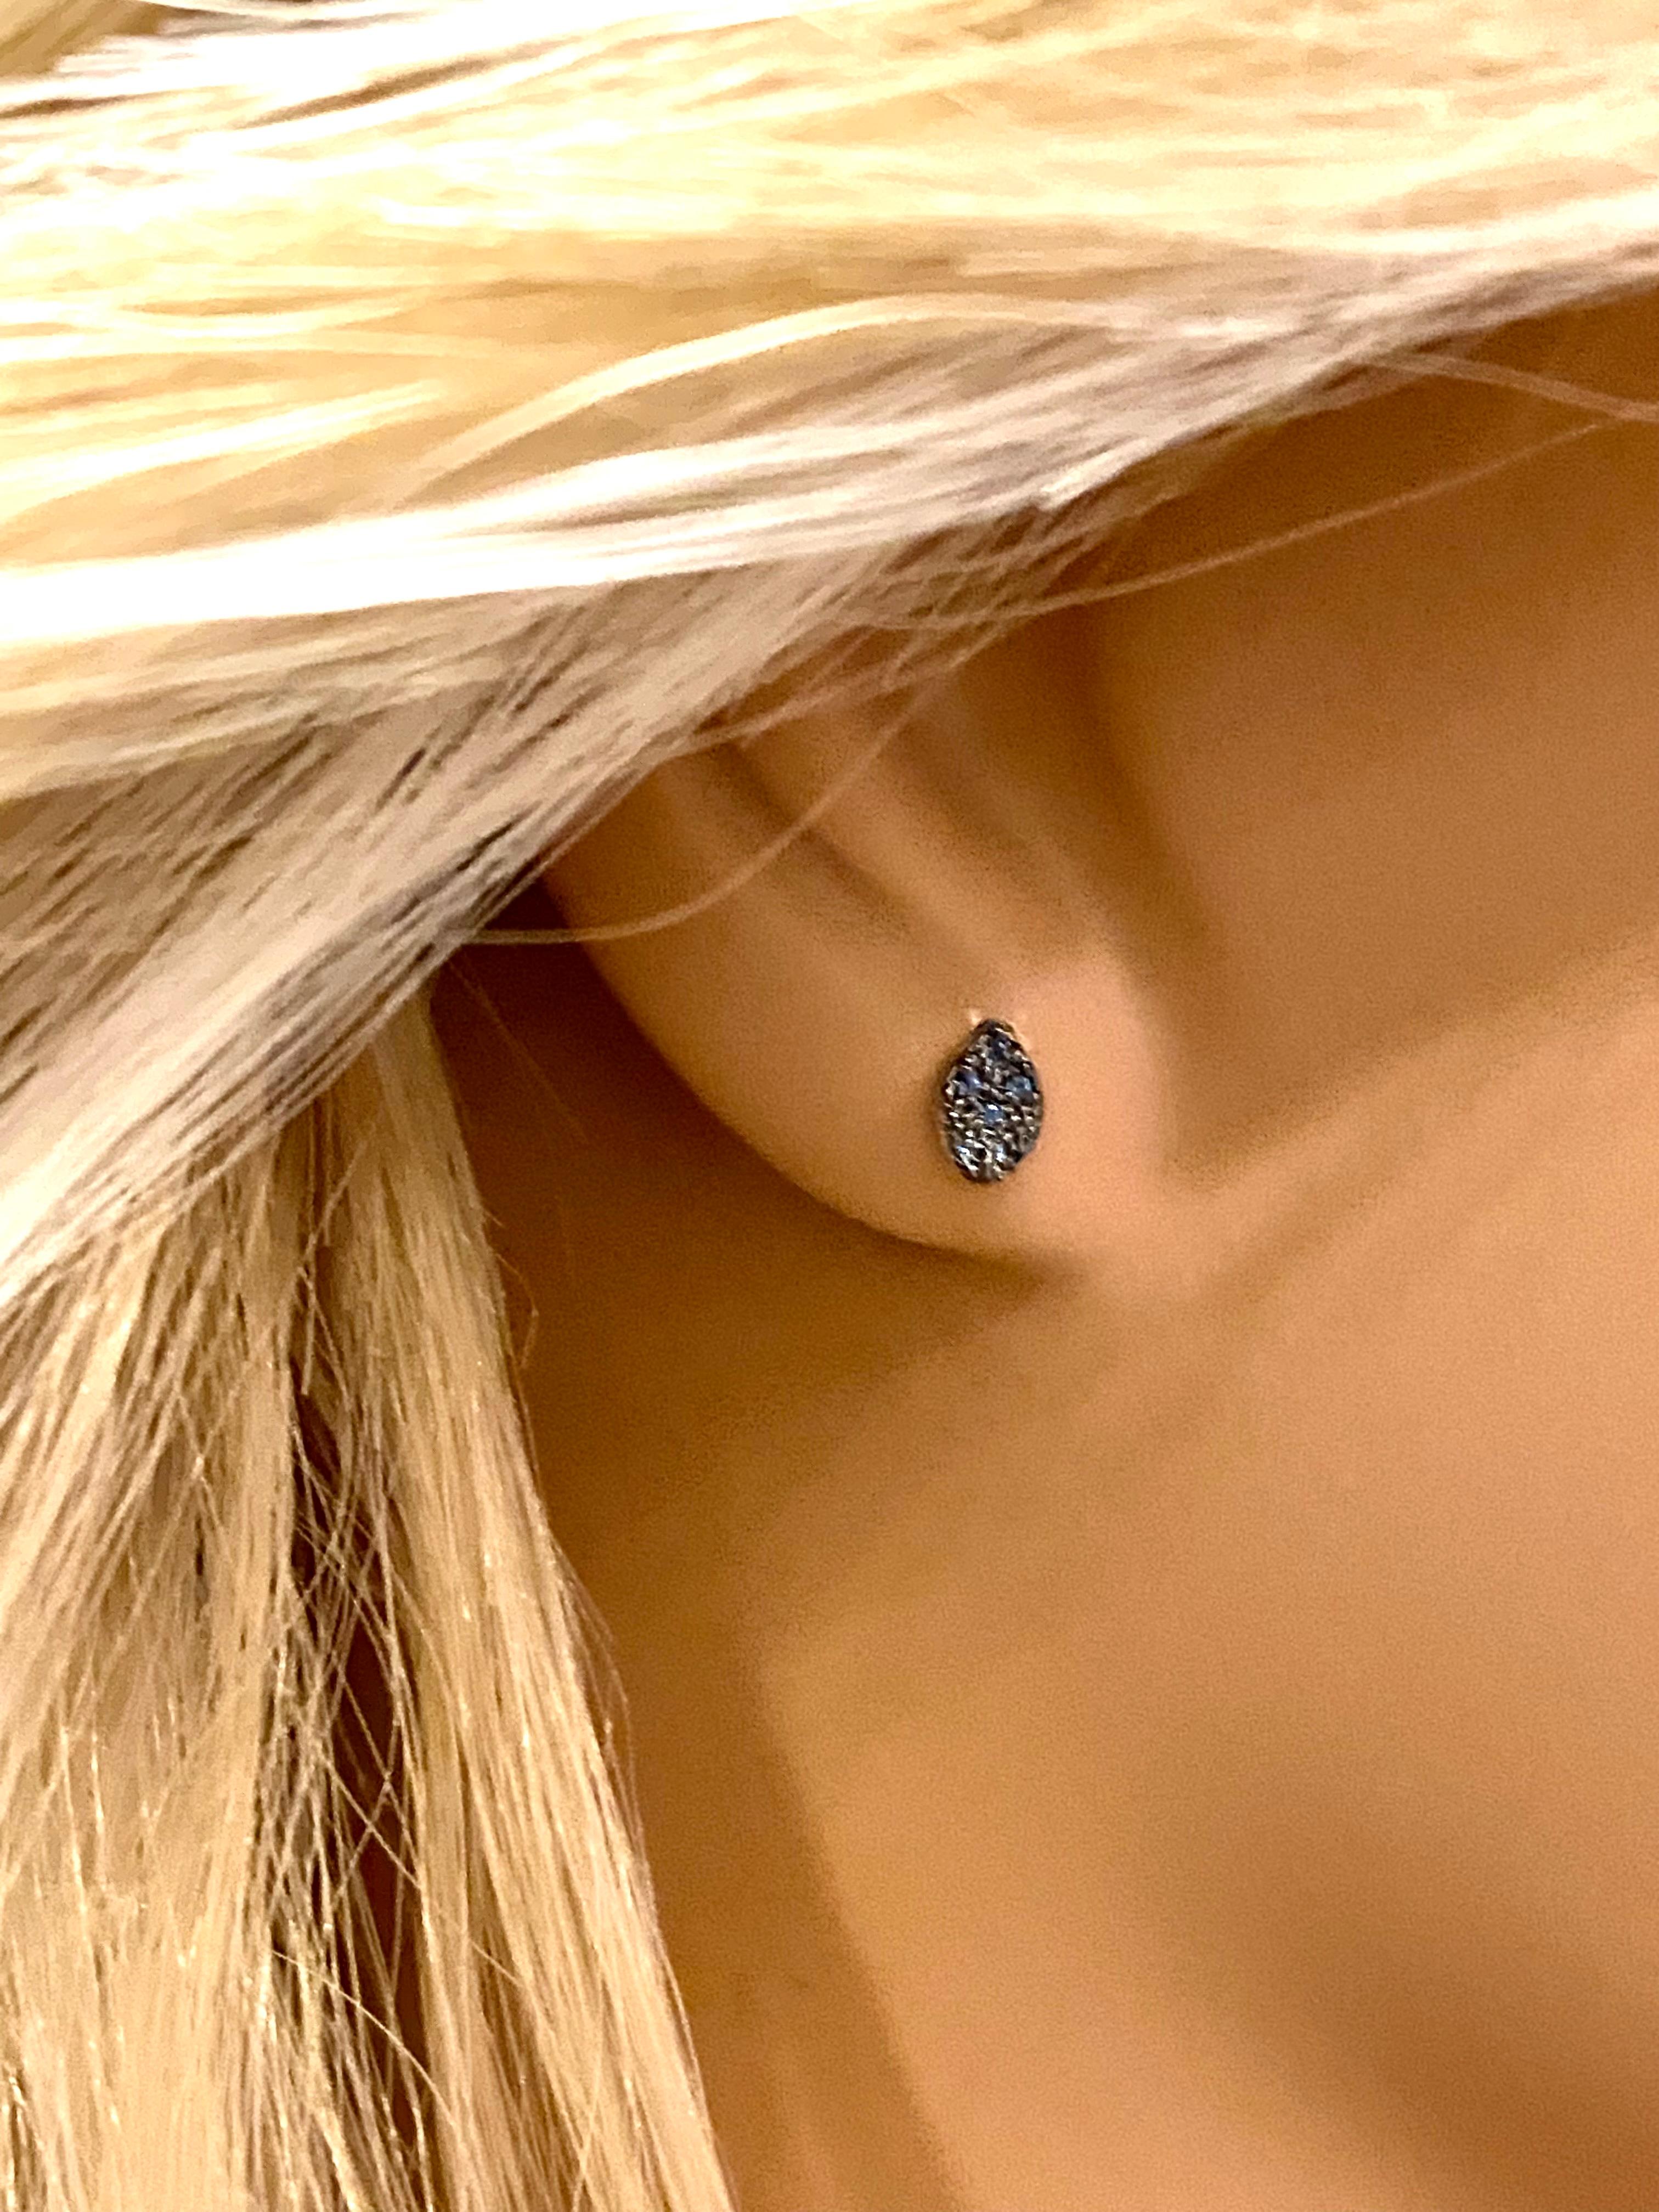 14 karat white gold tiny blacken sapphire stud earrings
Pear shape studs measuring 0.25 inch
Round sapphire weighing 0.25 carat 
Black rhodium plated 
New Earrings
Handmade in the USA
